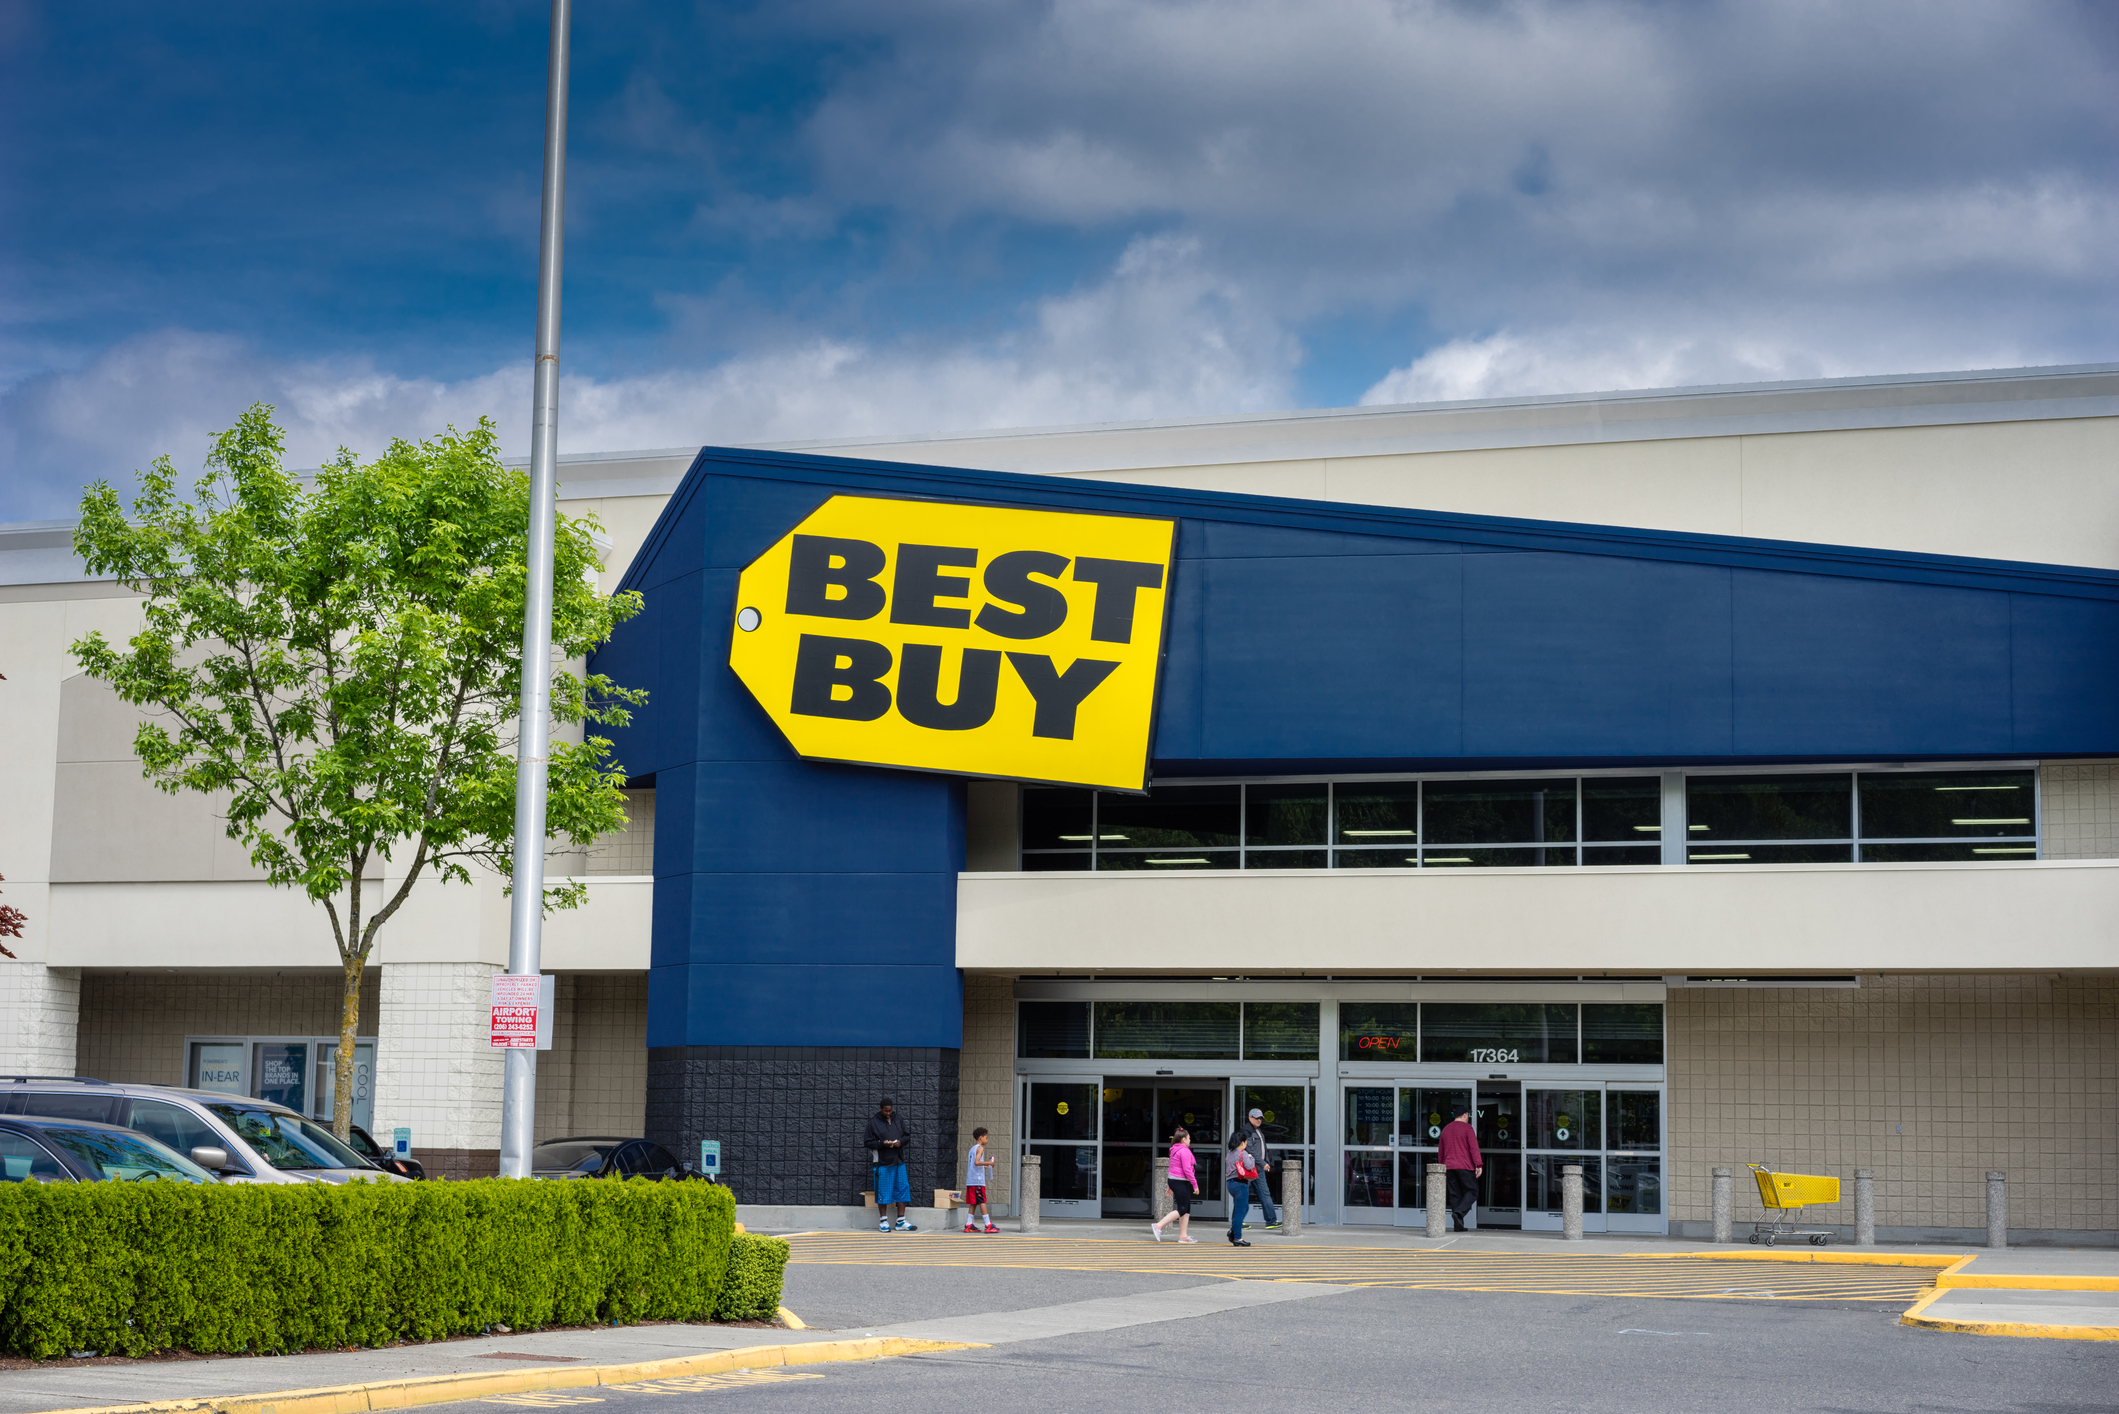 Get 10% back at Best Buy using Chase Pay, up to $300 in purchases